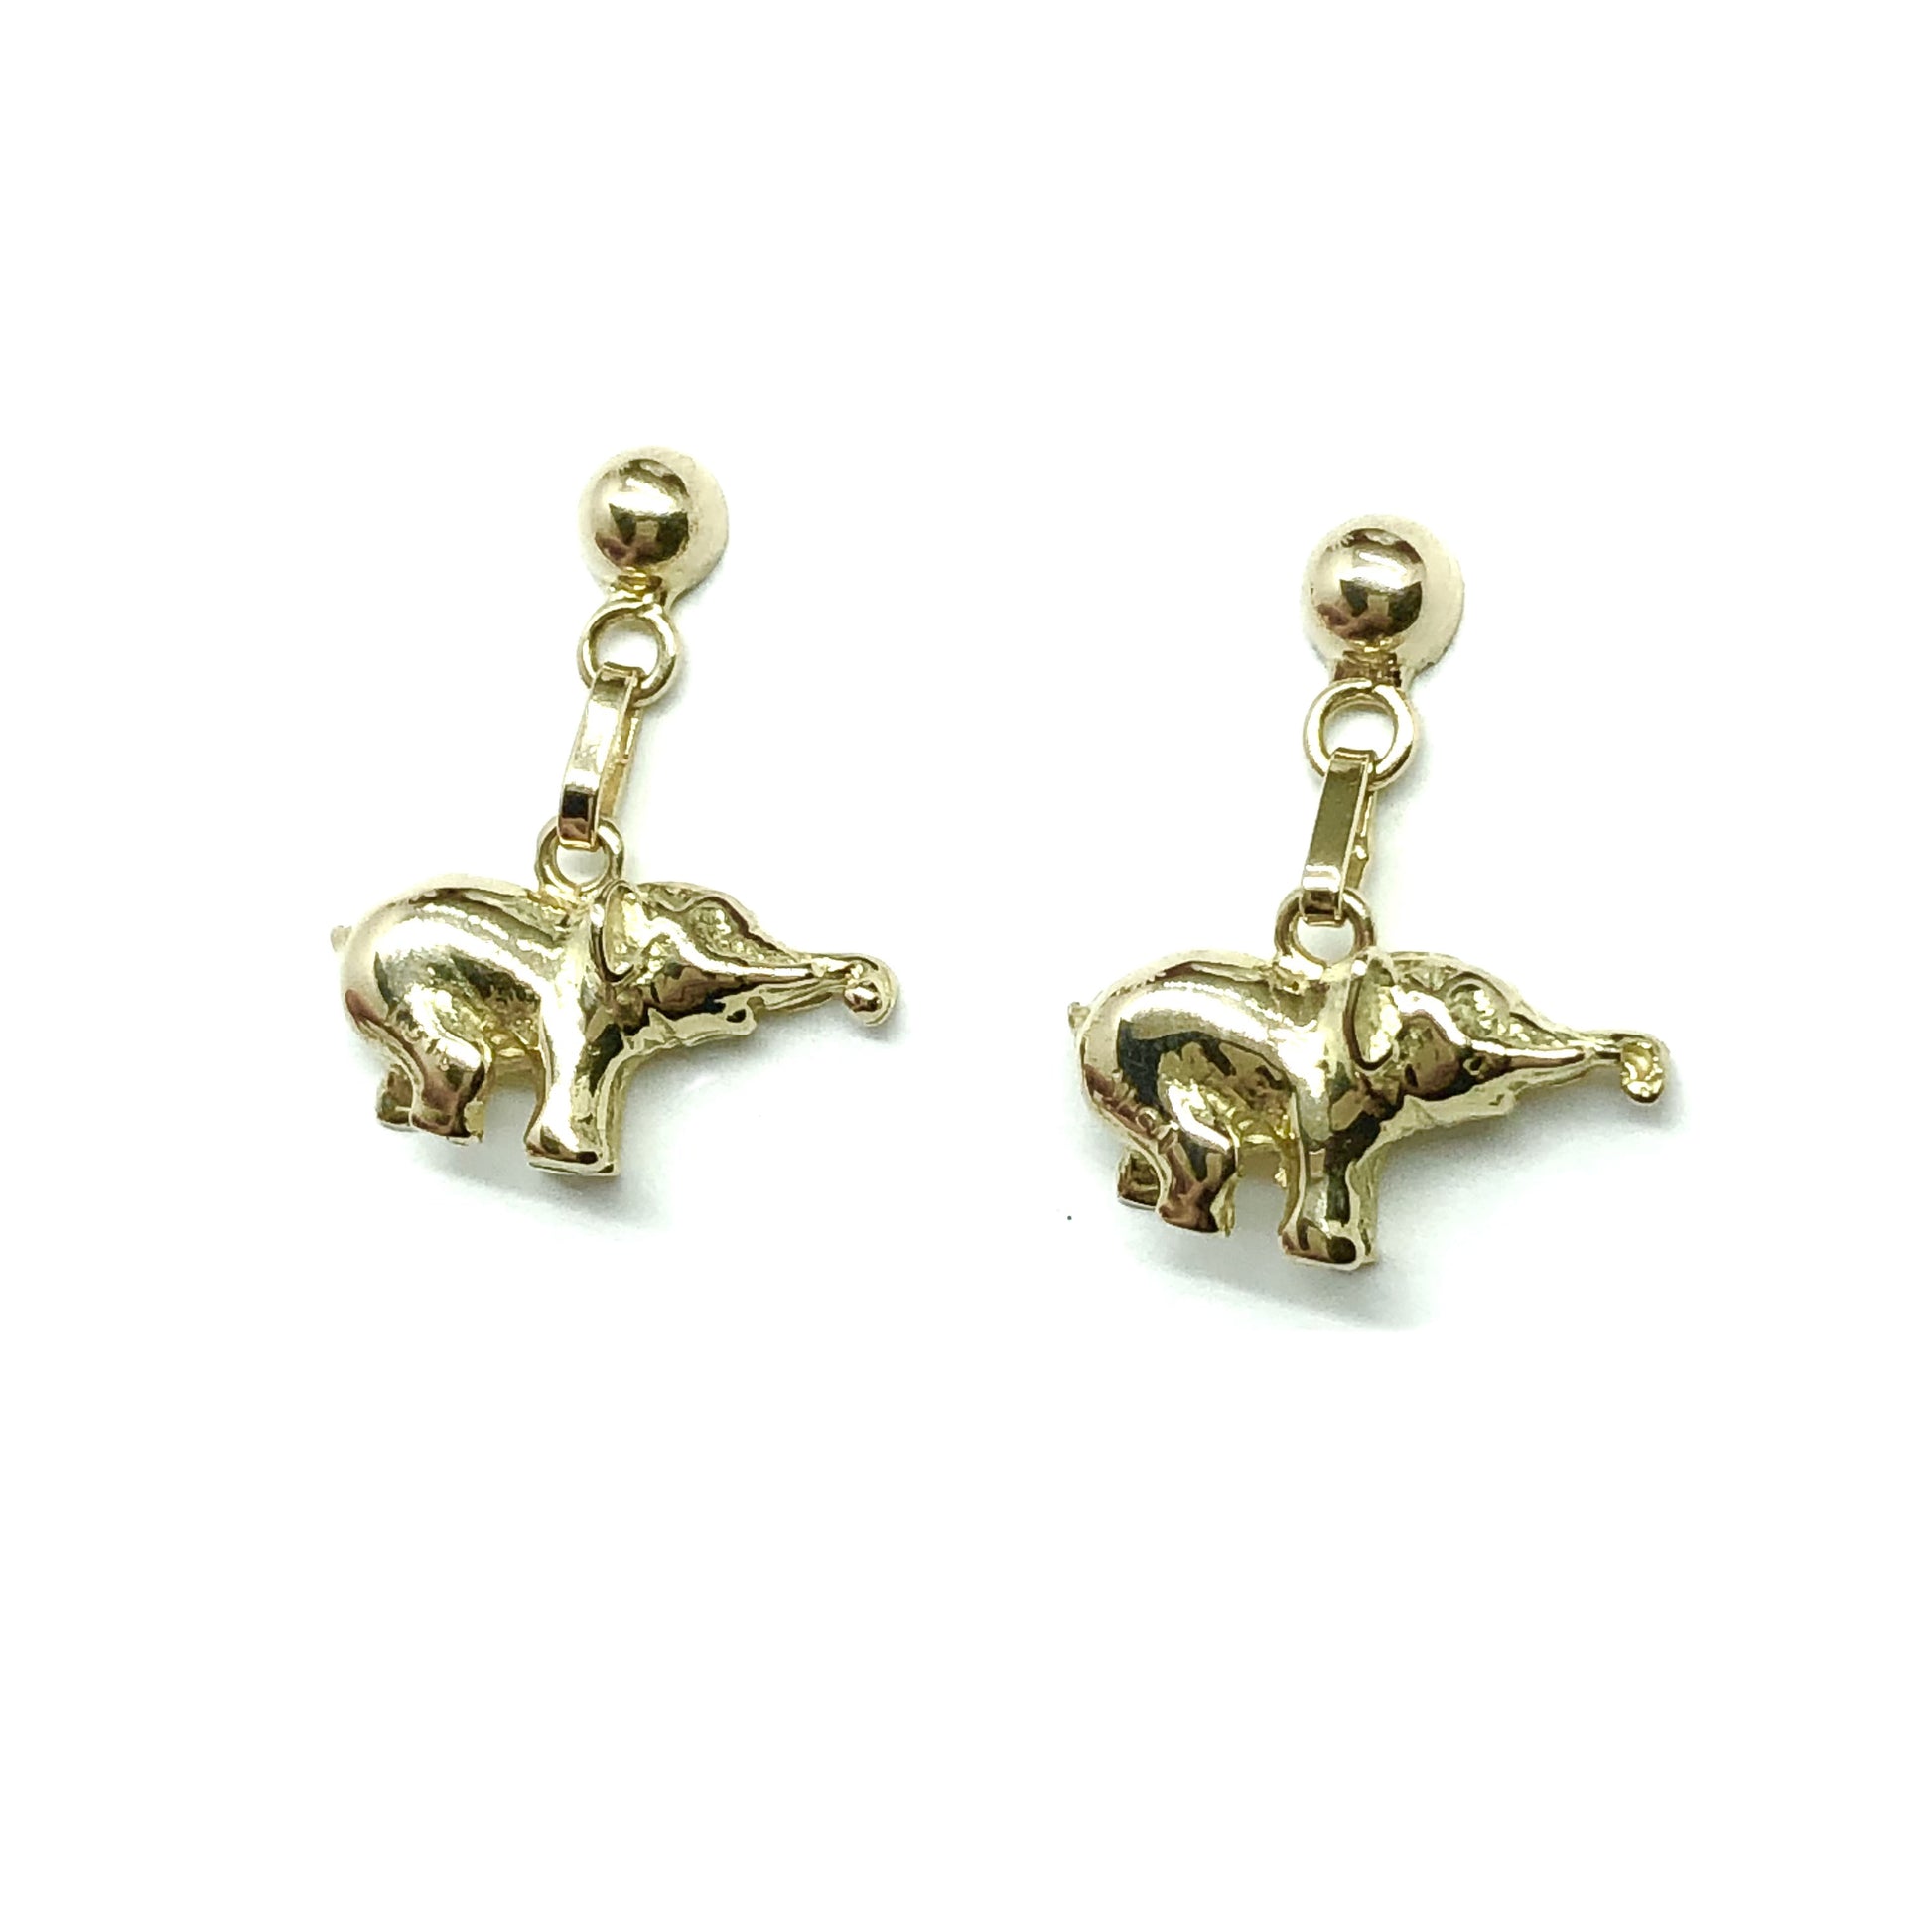 Jewelry used - Solid 18k Gold Elephant Charm Style Dangle Earrings